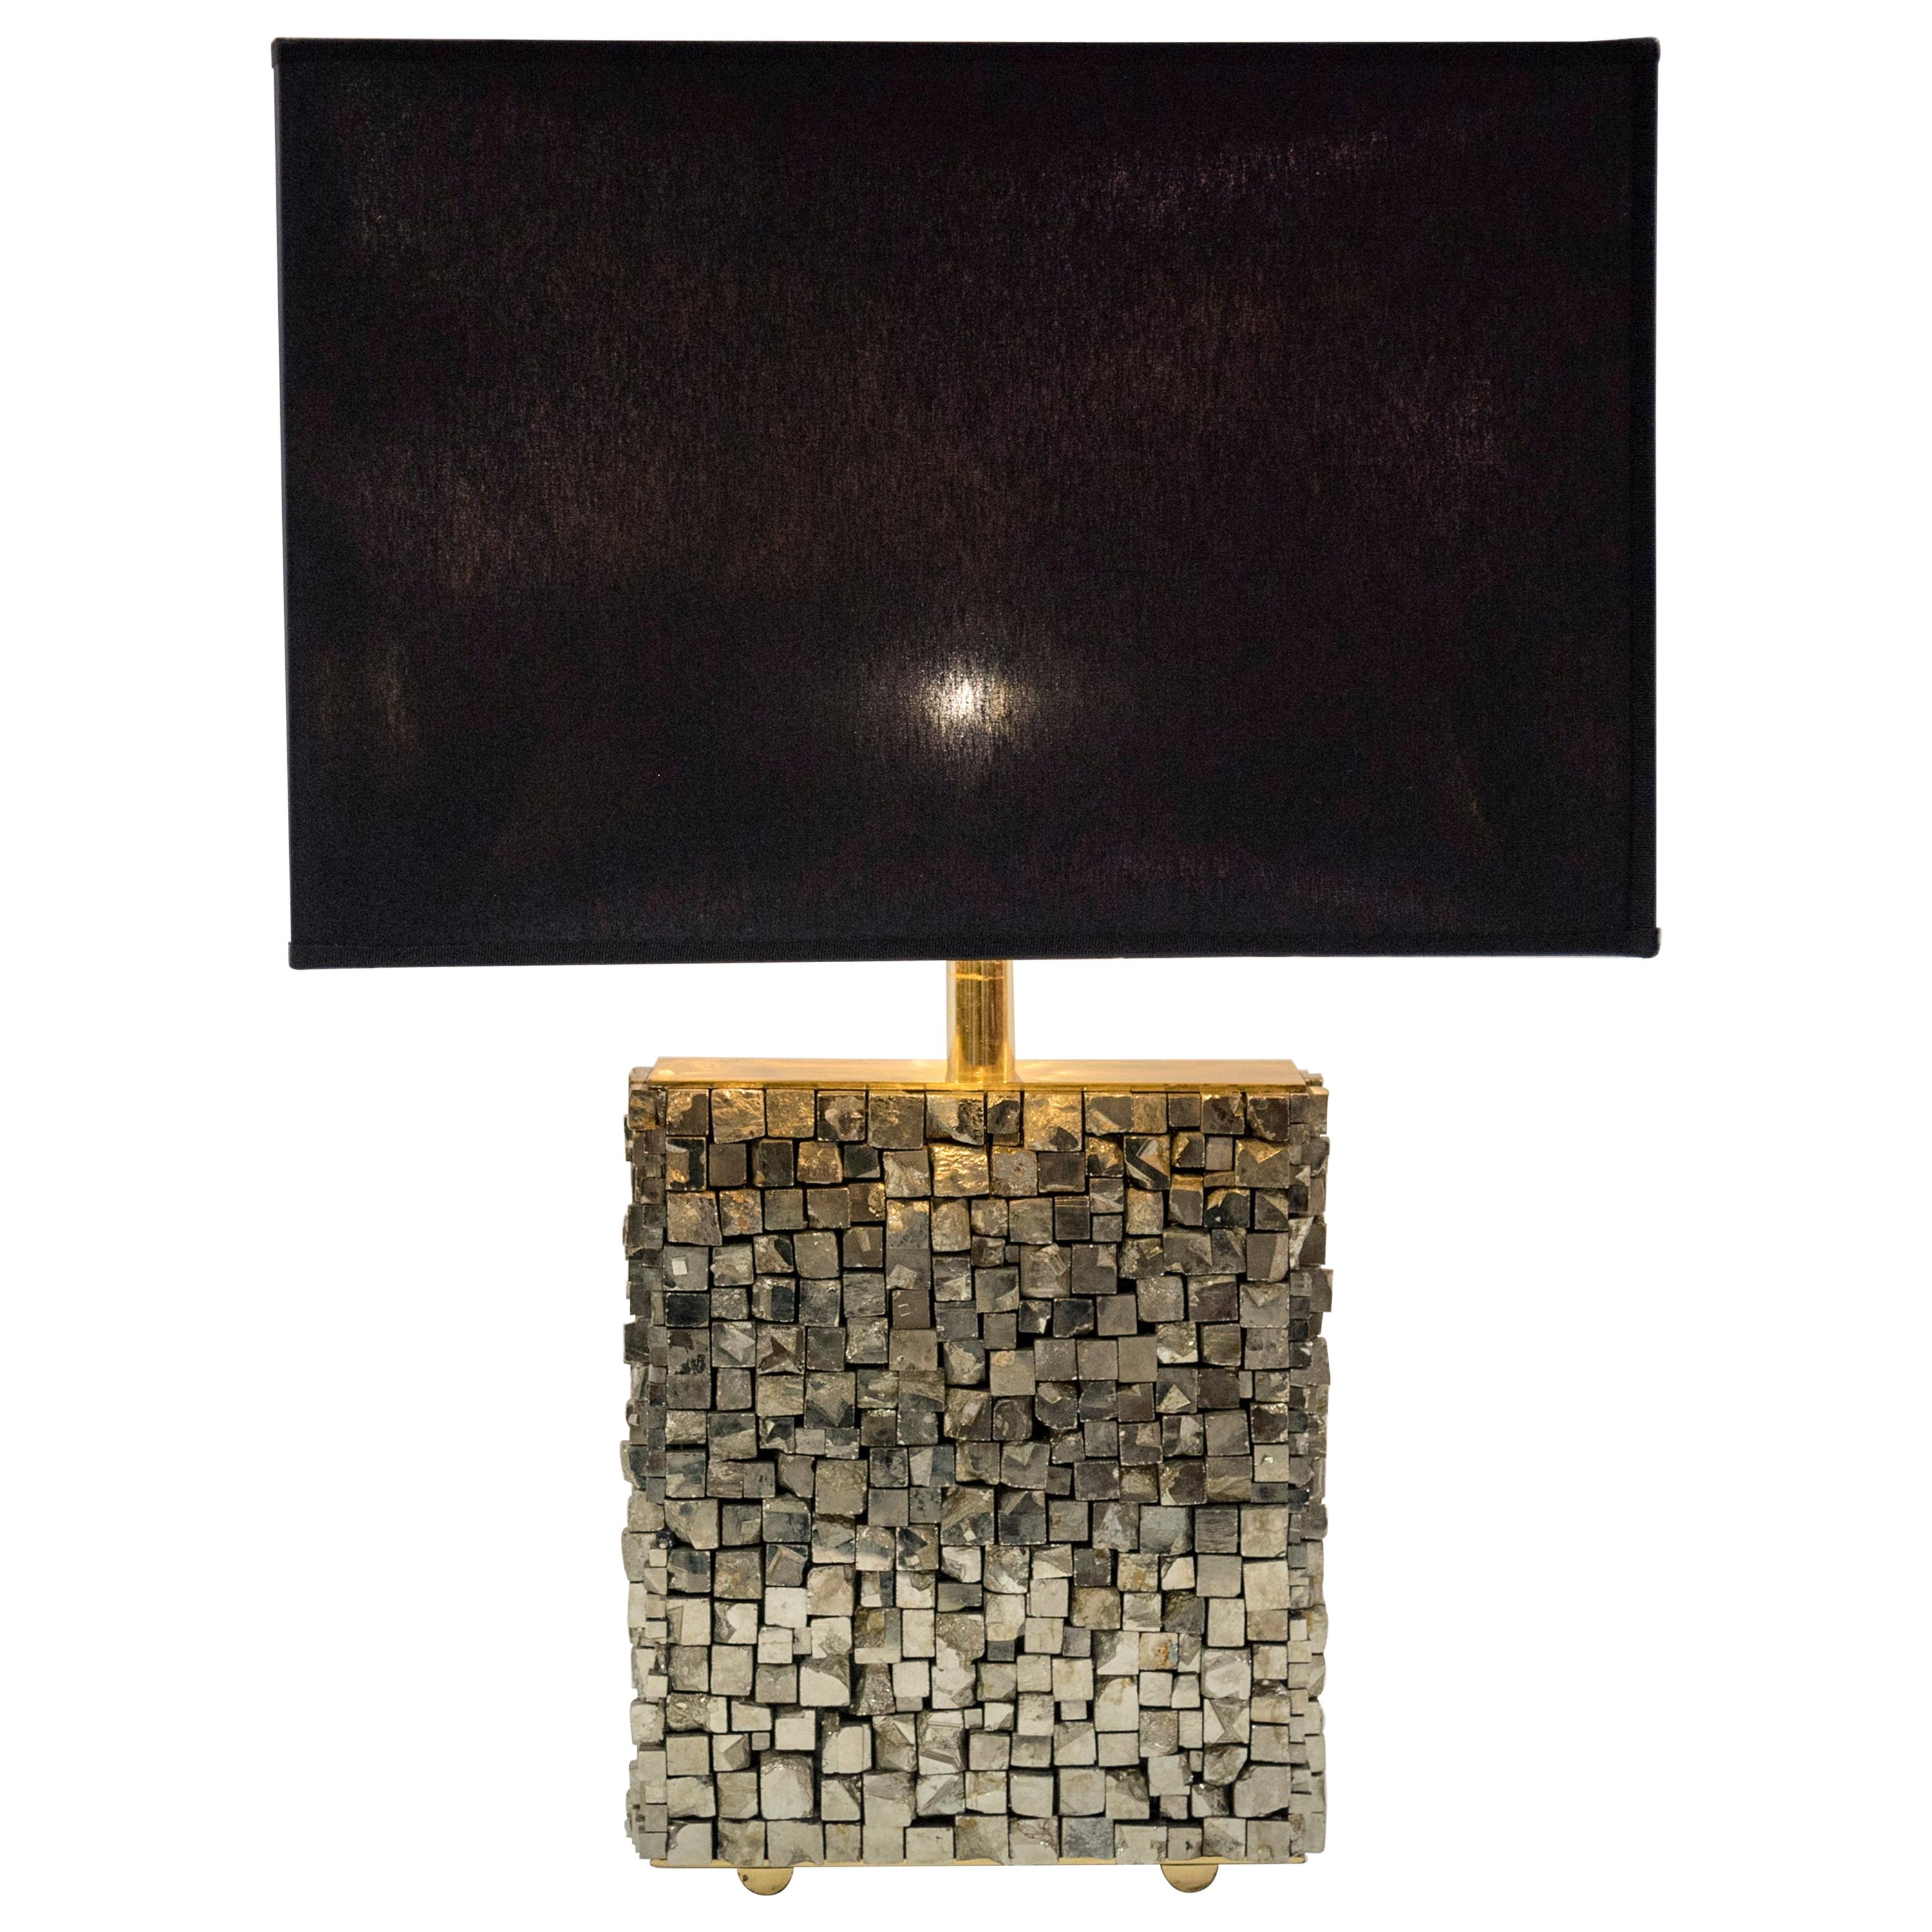 Lamp with Pyrites Stones by Georges Mathias